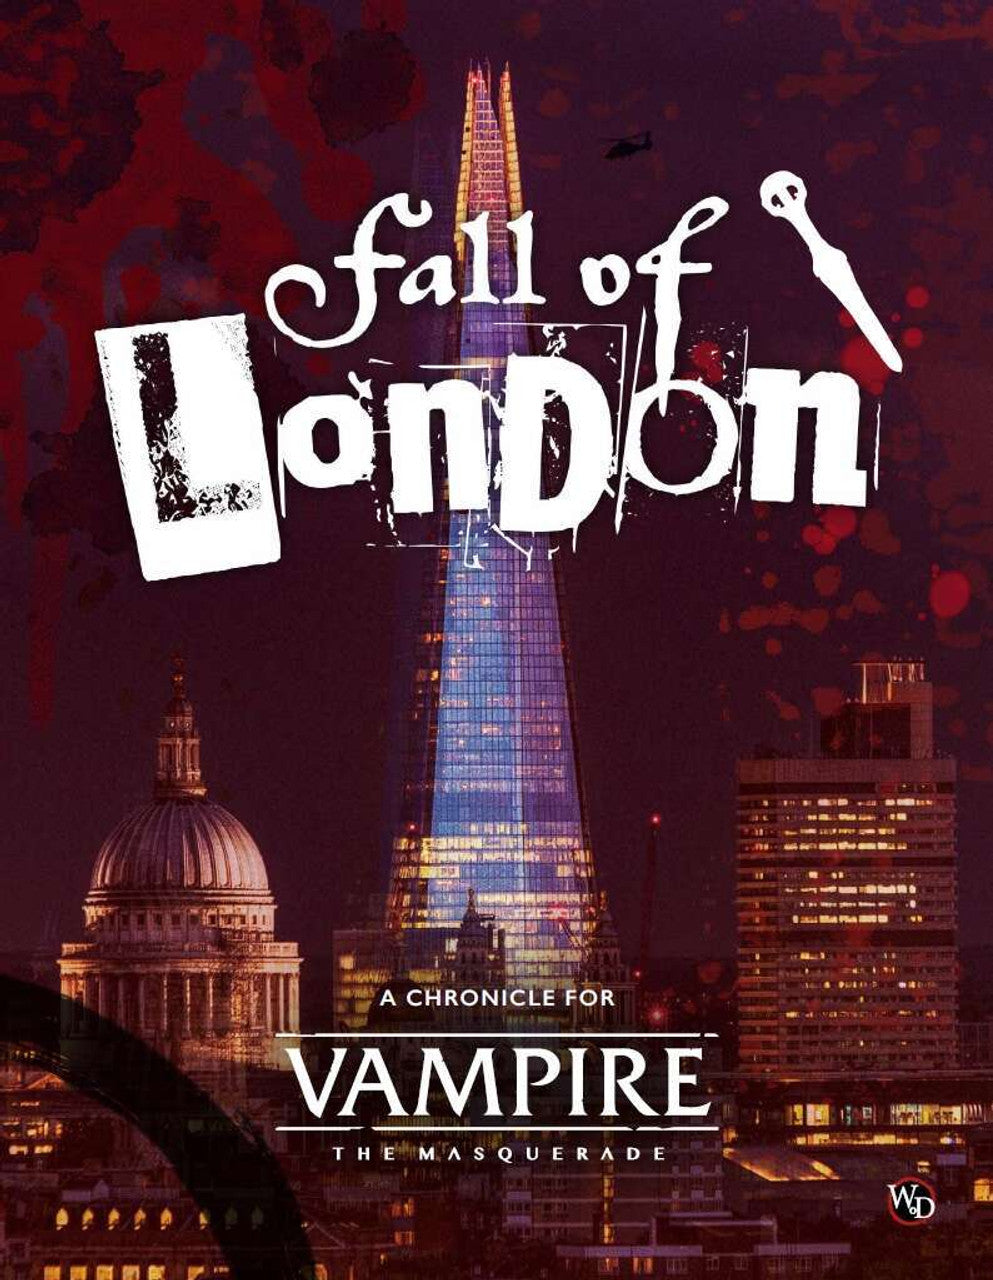 Vampire The Masquerade: Fall of London Chronicle - Bards & Cards